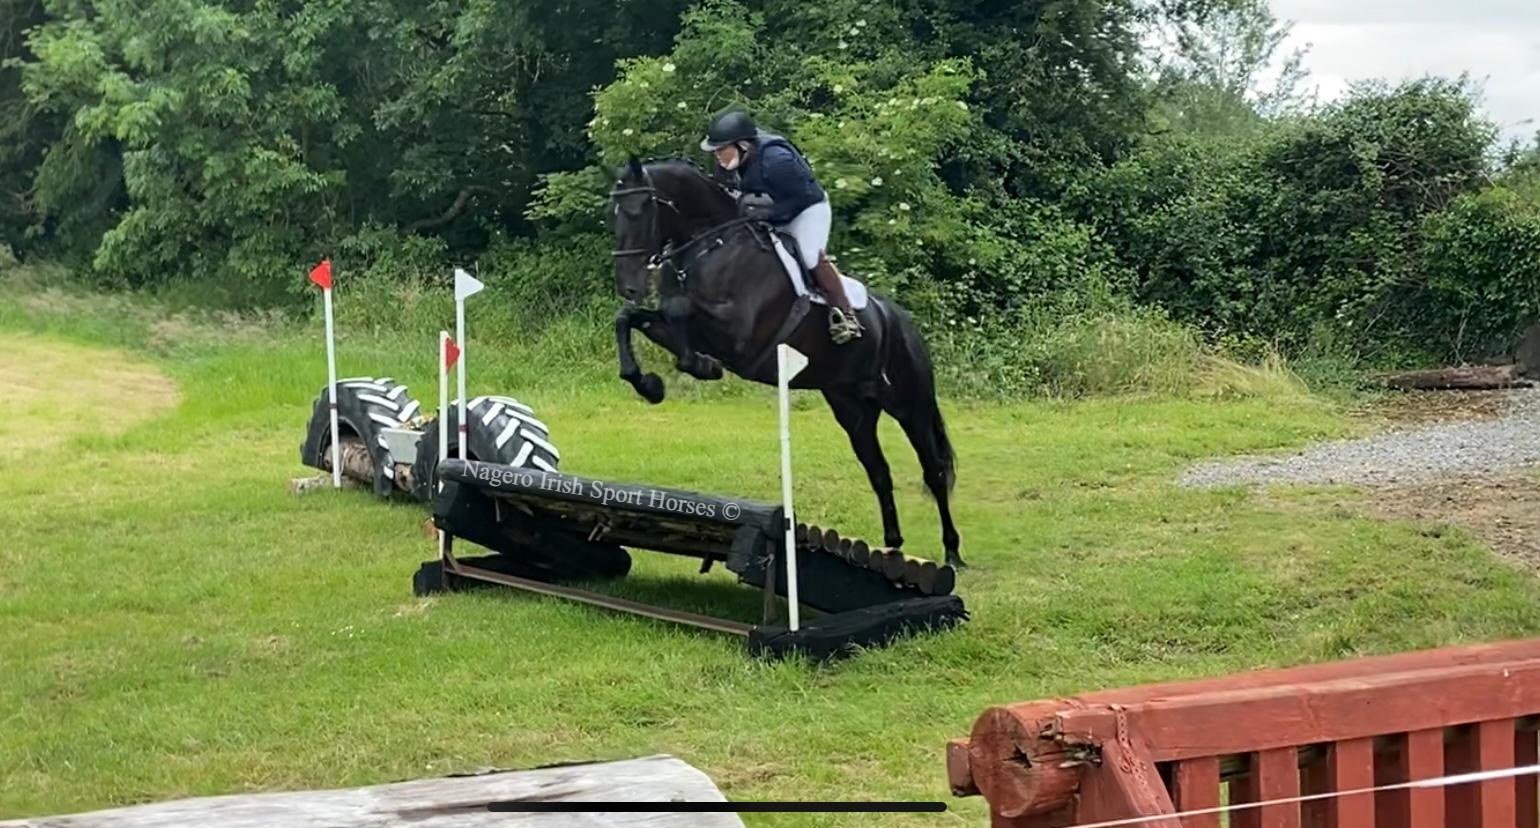 Black RID, 16.3hh. One in a Million!!